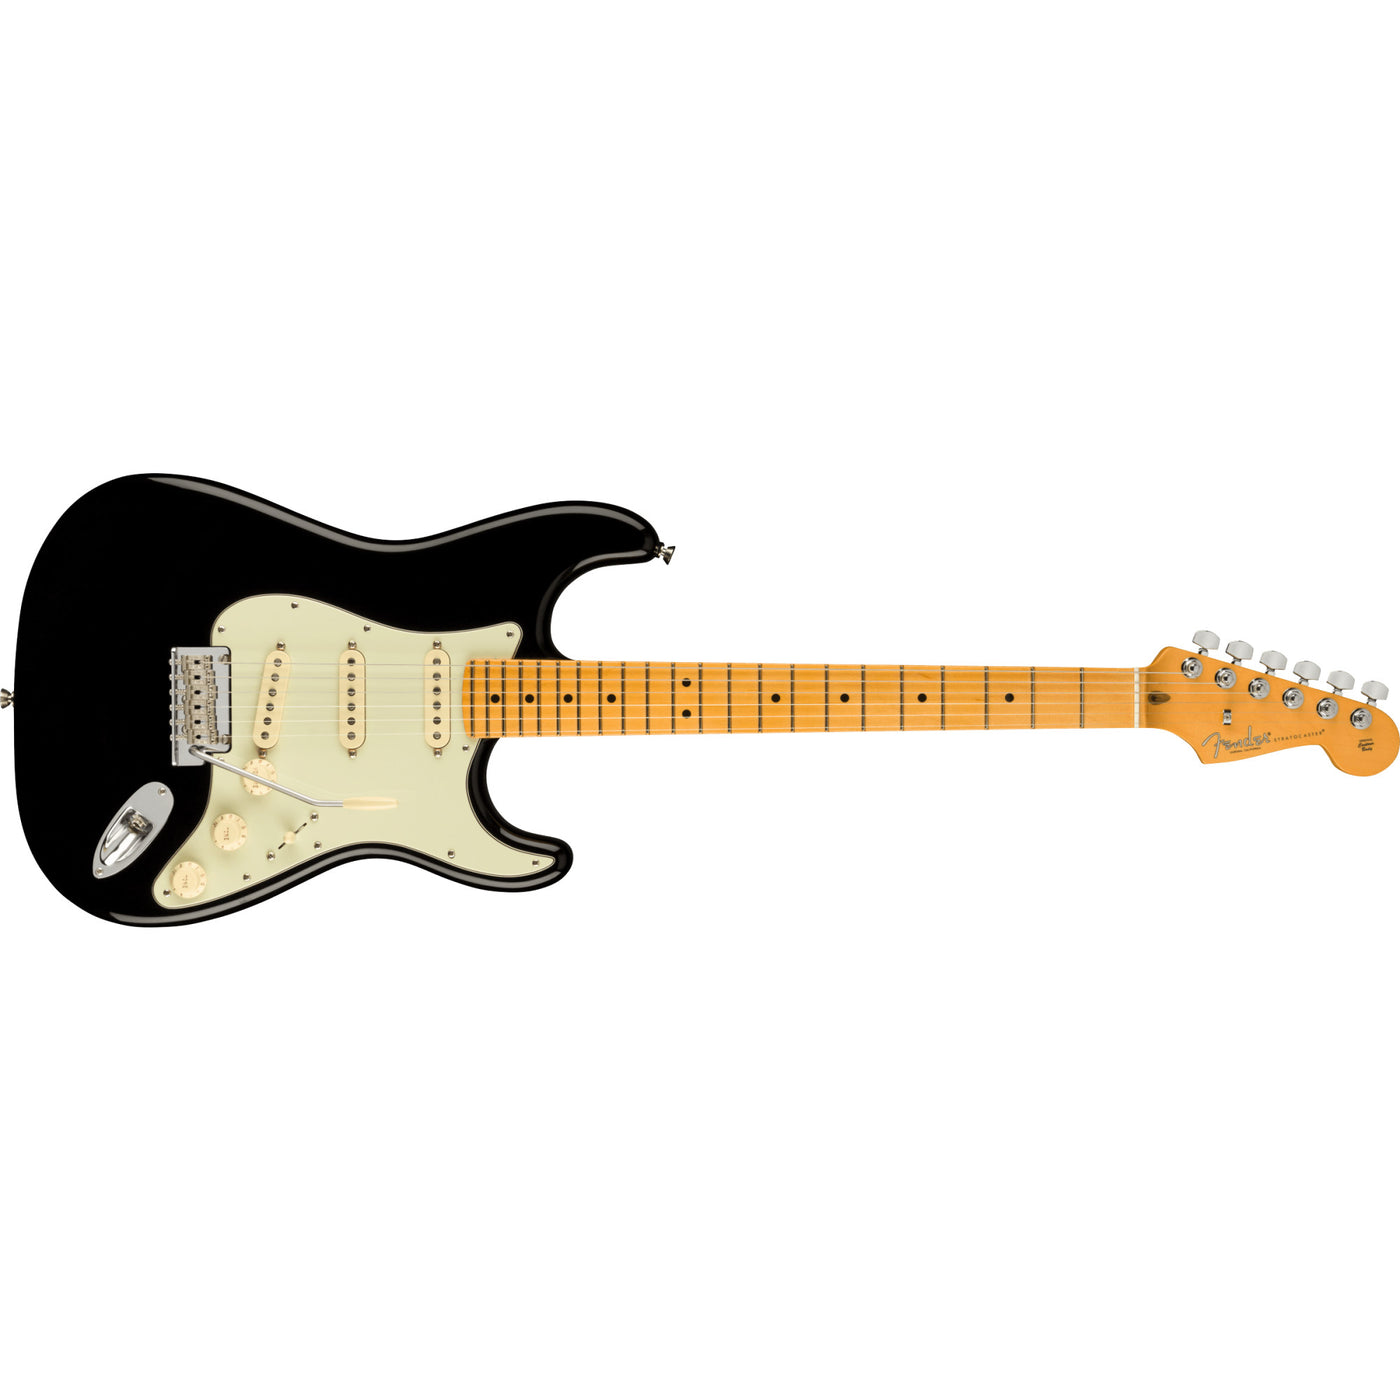 Fender American Professional ll Stratocaster Electric Guitar, Black (0113902706)